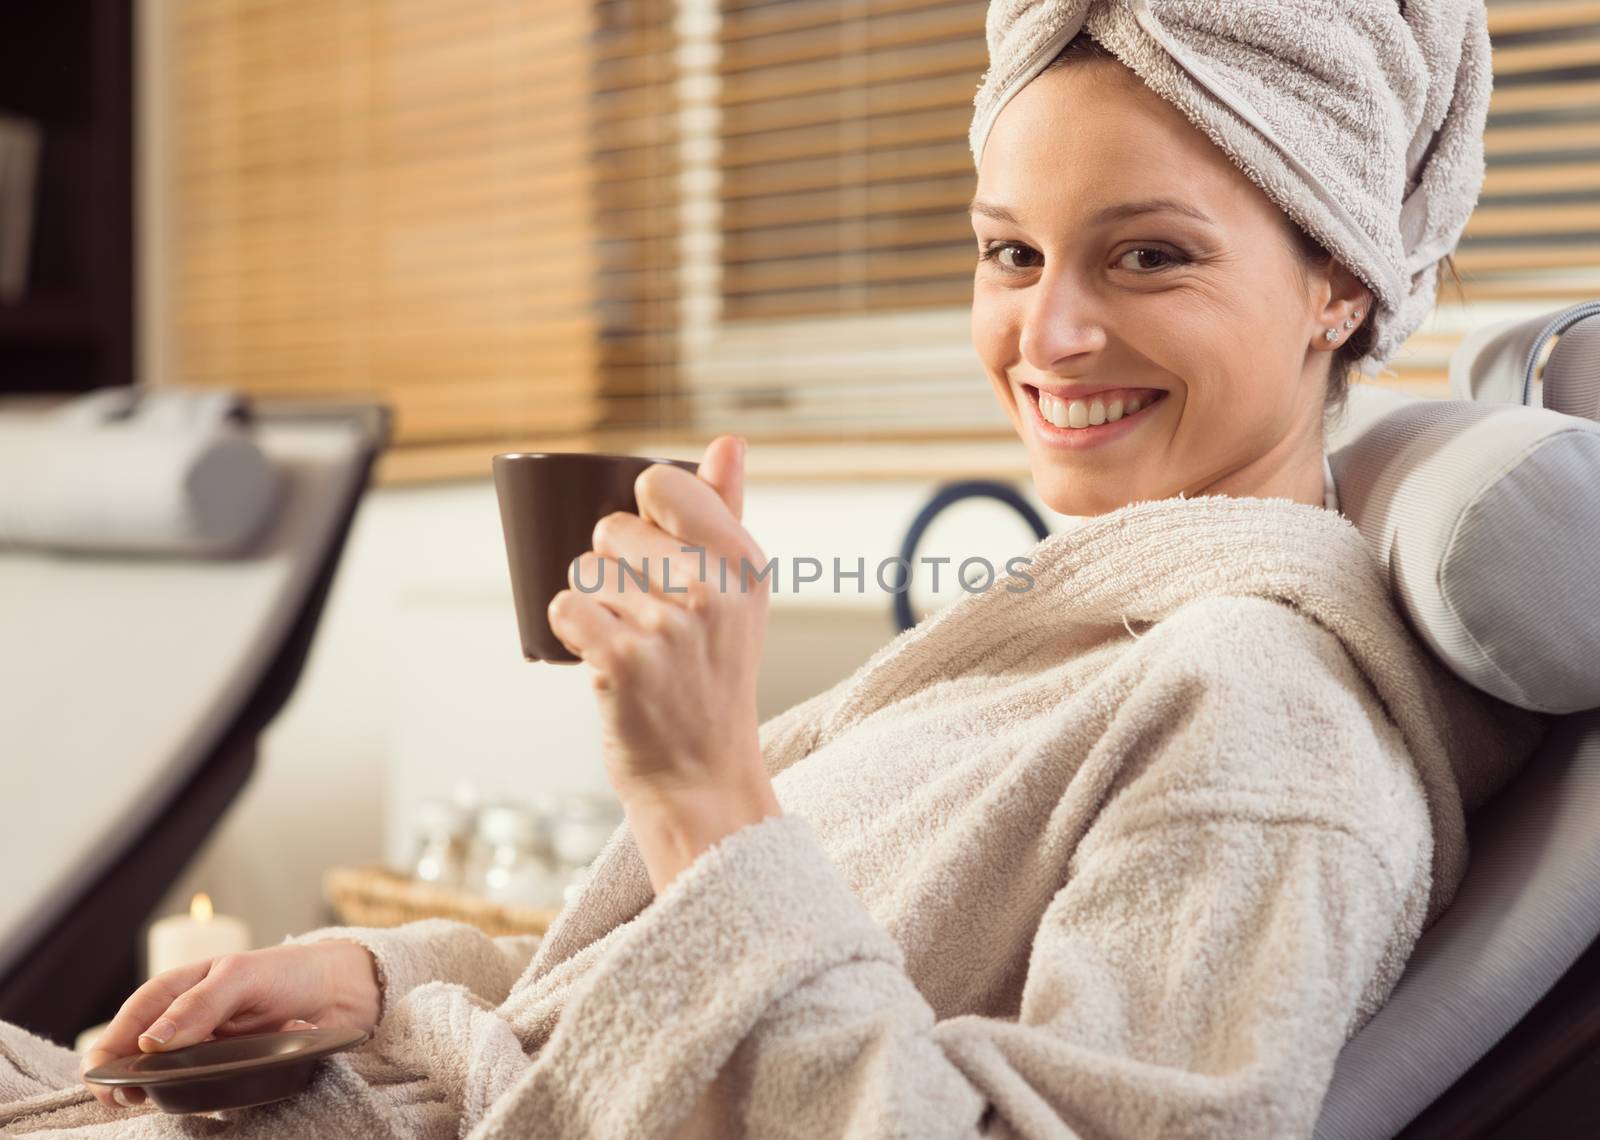 Young woman smiling and relaxing at spa, holding an hot healthy drink.